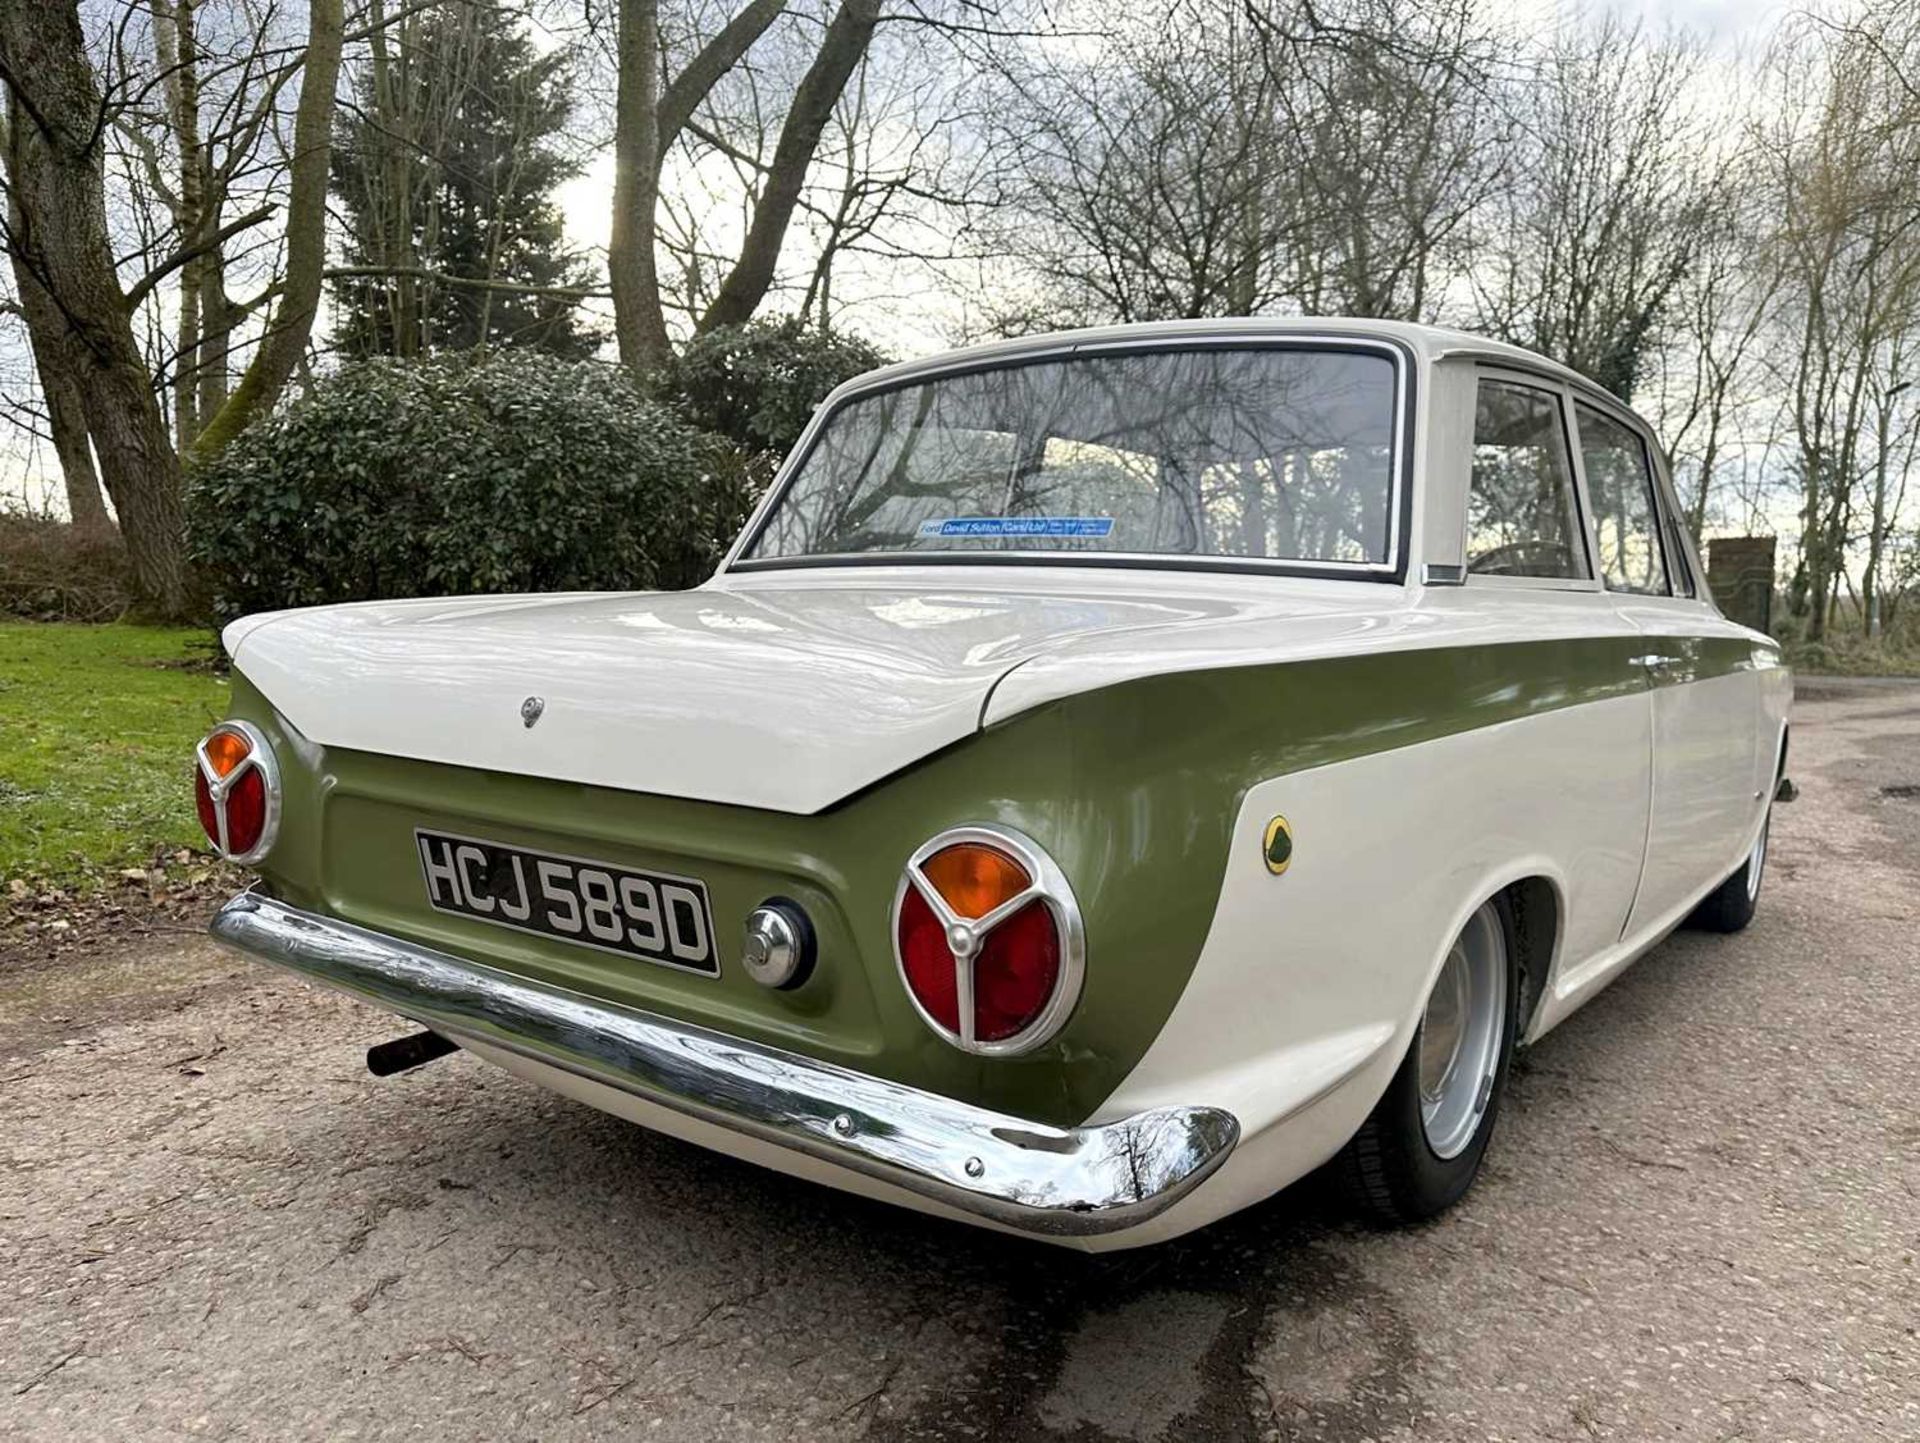 1963 Ford Lotus Cortina Pre-Aeroflow model, fitted with A-frame rear suspension - Image 20 of 58